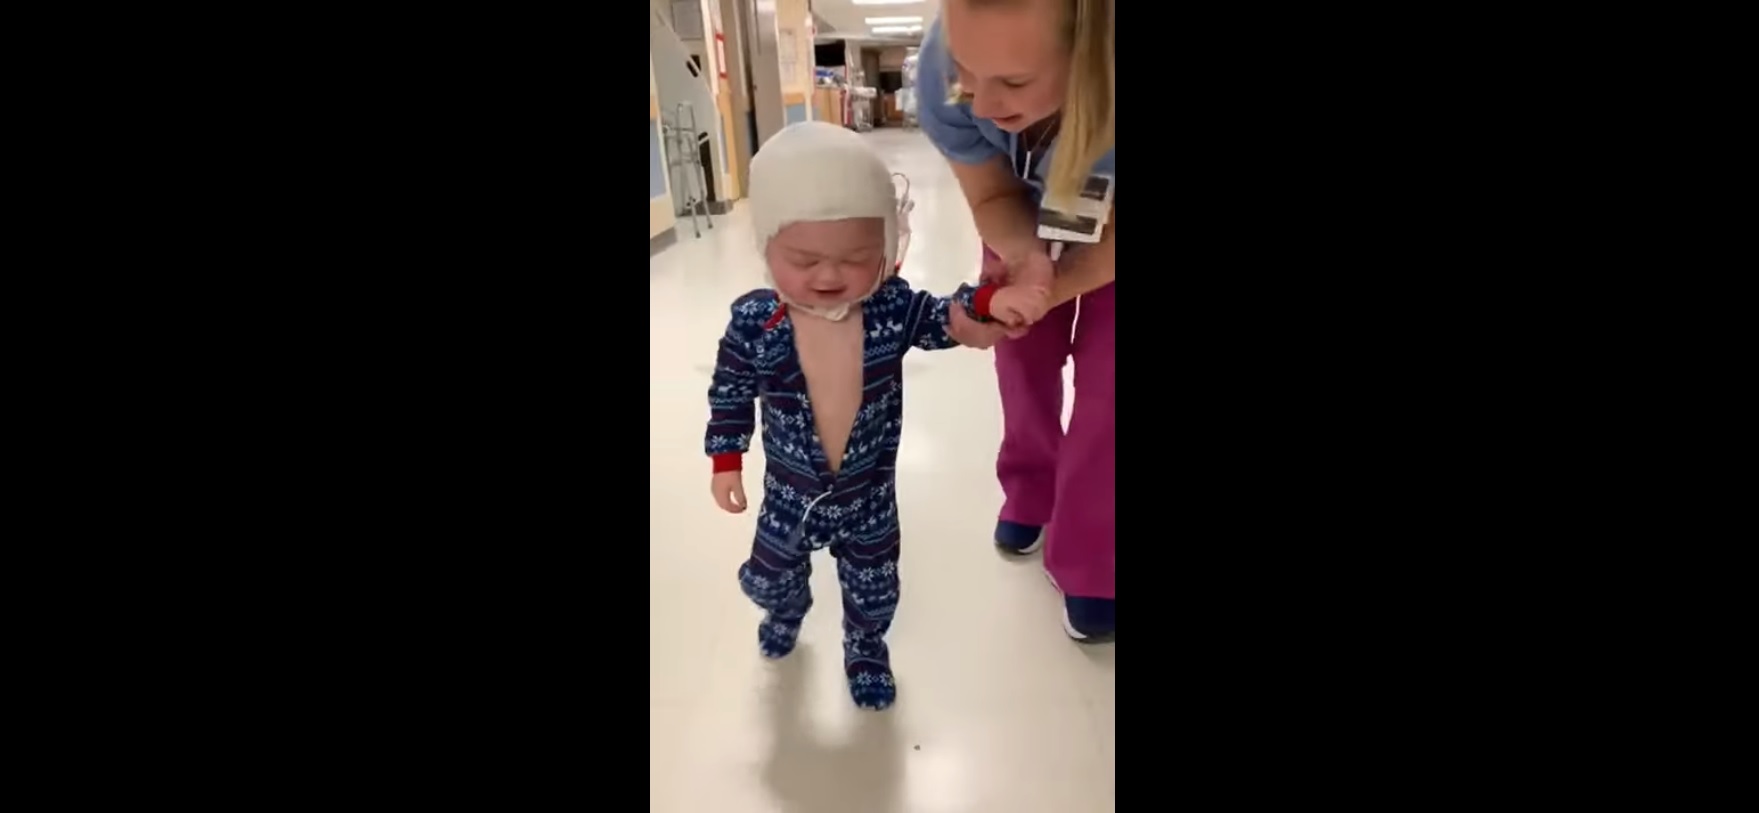 PHOTO: Branson had received a seven-hour procedure in an attempt to correct craniosynostosis--a condition in which joints between the bones of the skull close too early, causing problems with normal brain and skull growth.